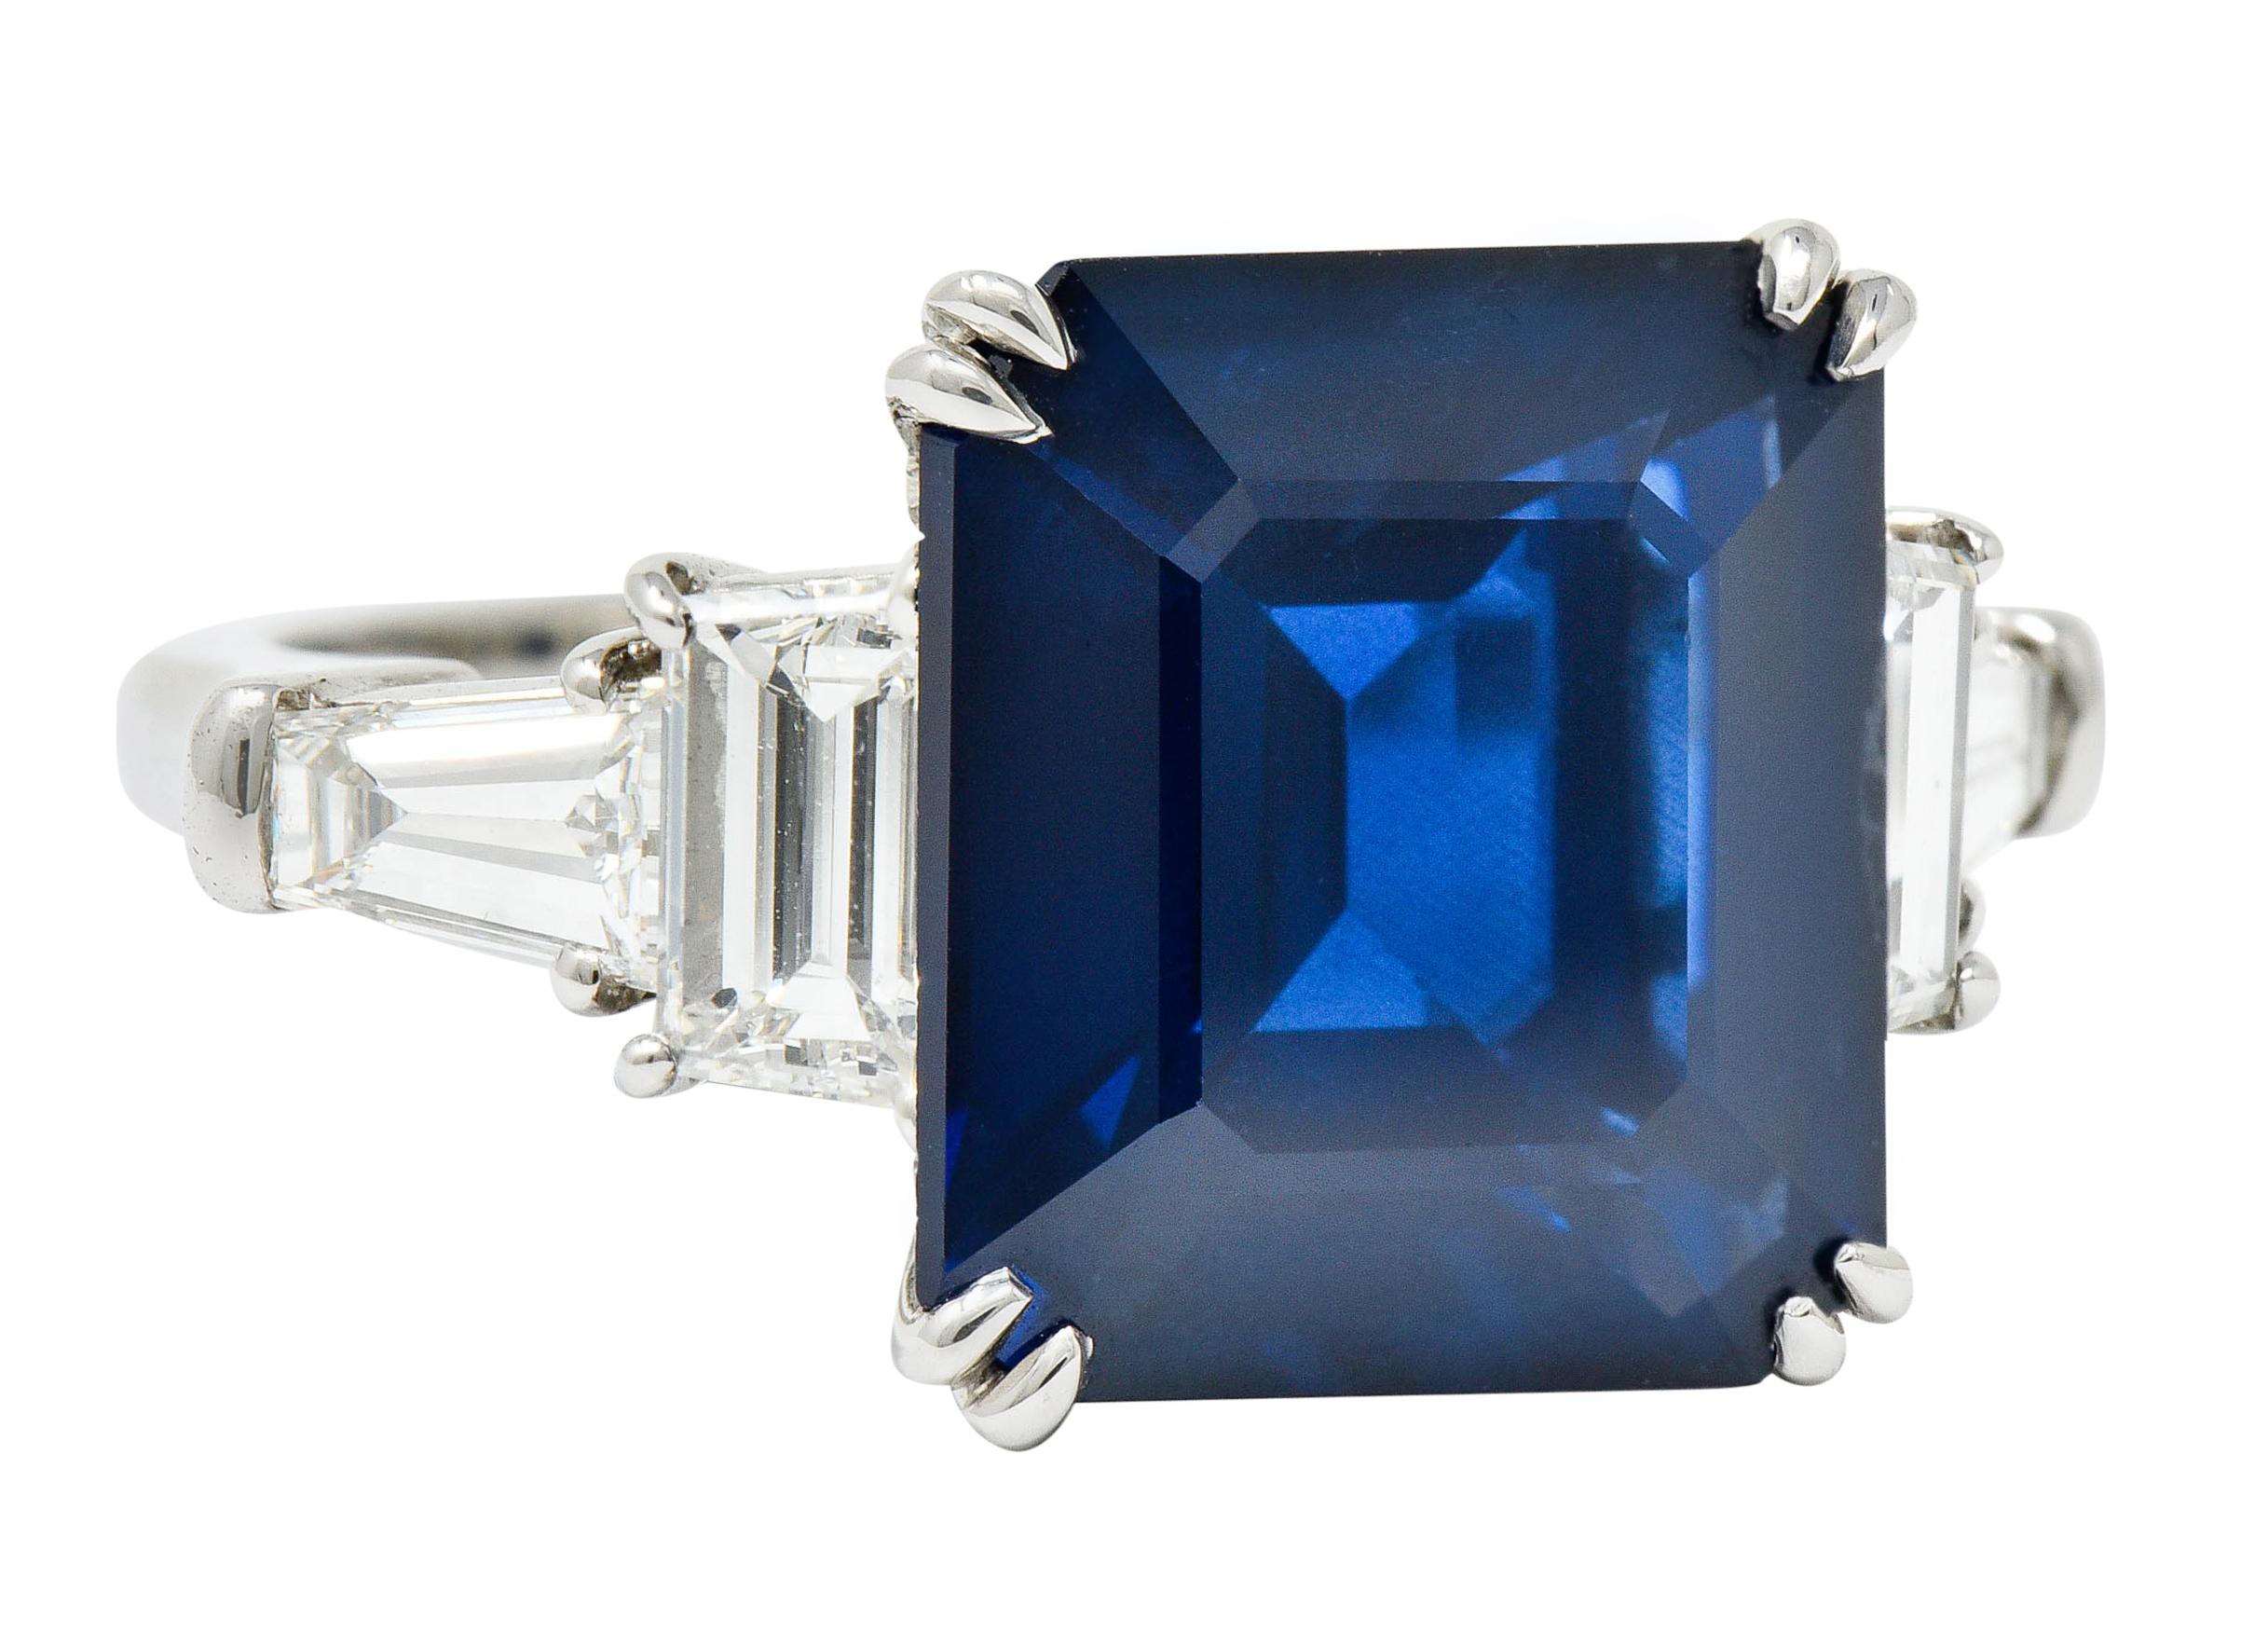 Centering a rectangular step cut sapphire weighing approximately 9.11 carats

Transparent with uniform medium-dark Prussian blue color

Basket and talon set with stylized split prongs, then flanked by tapered and baguette cut diamonds

Weighing in